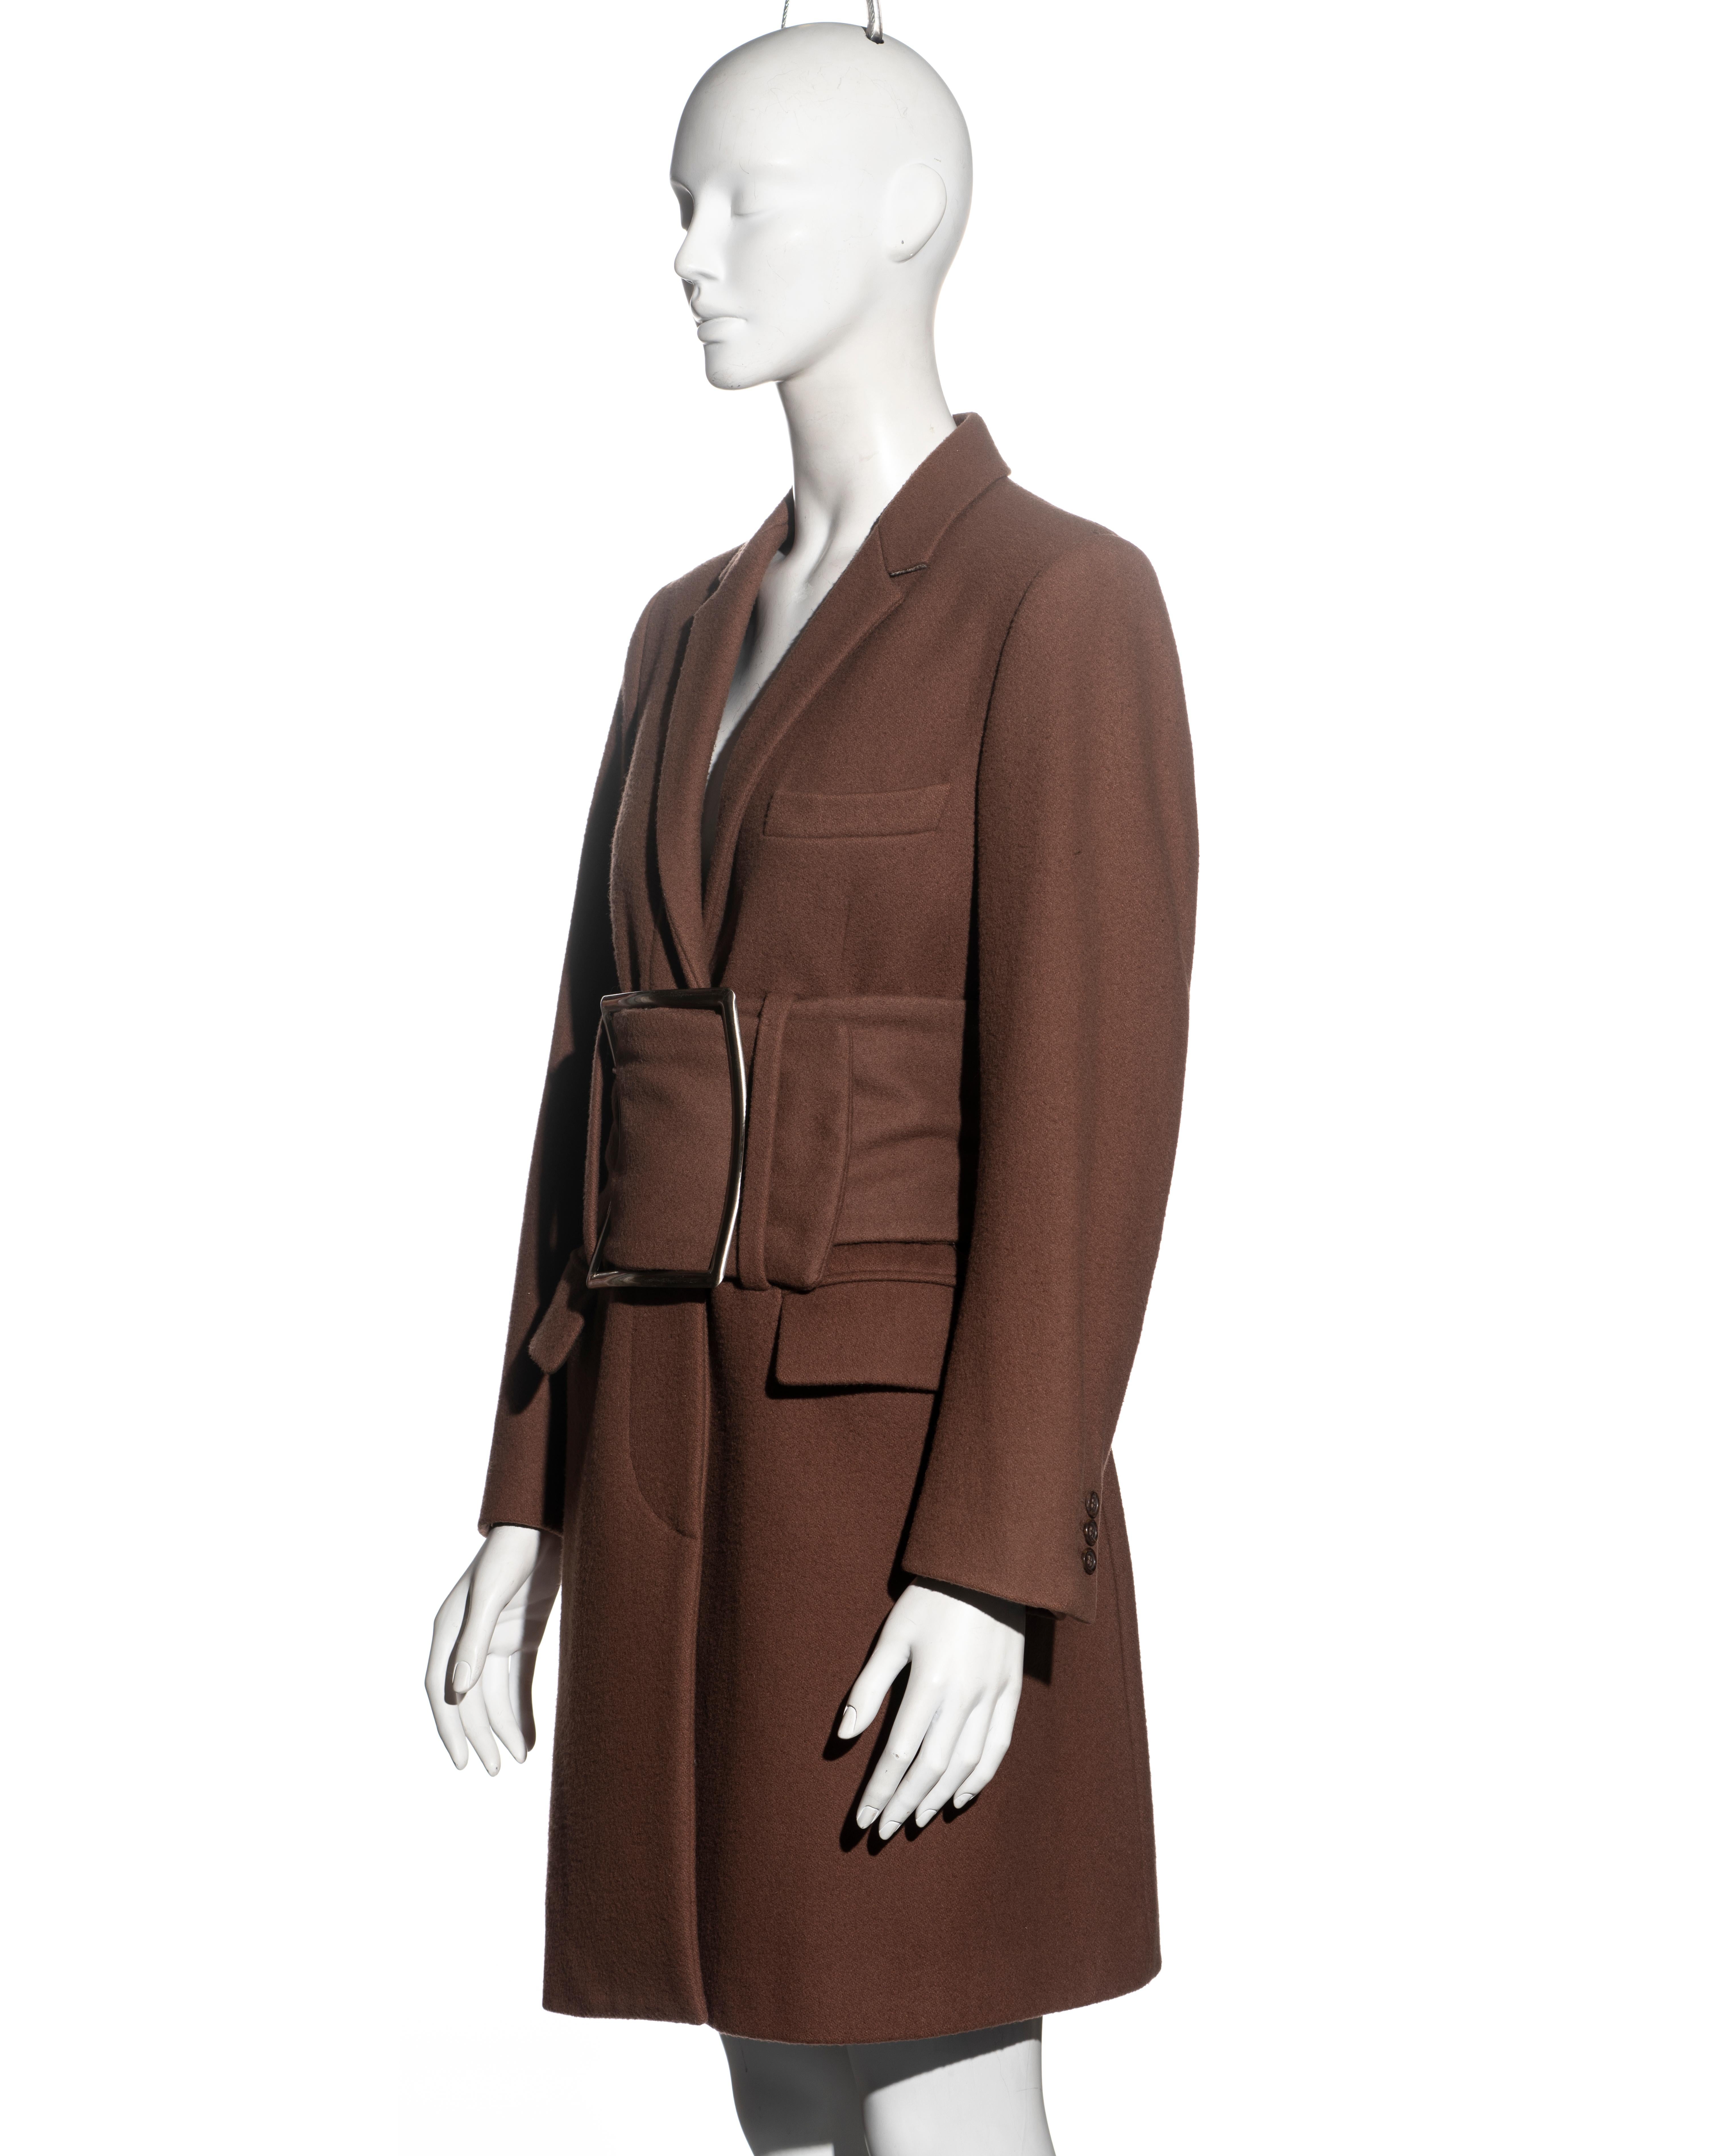 Martin Margiela brown wool coat with matching oversized belt, fw 1996 For Sale 7